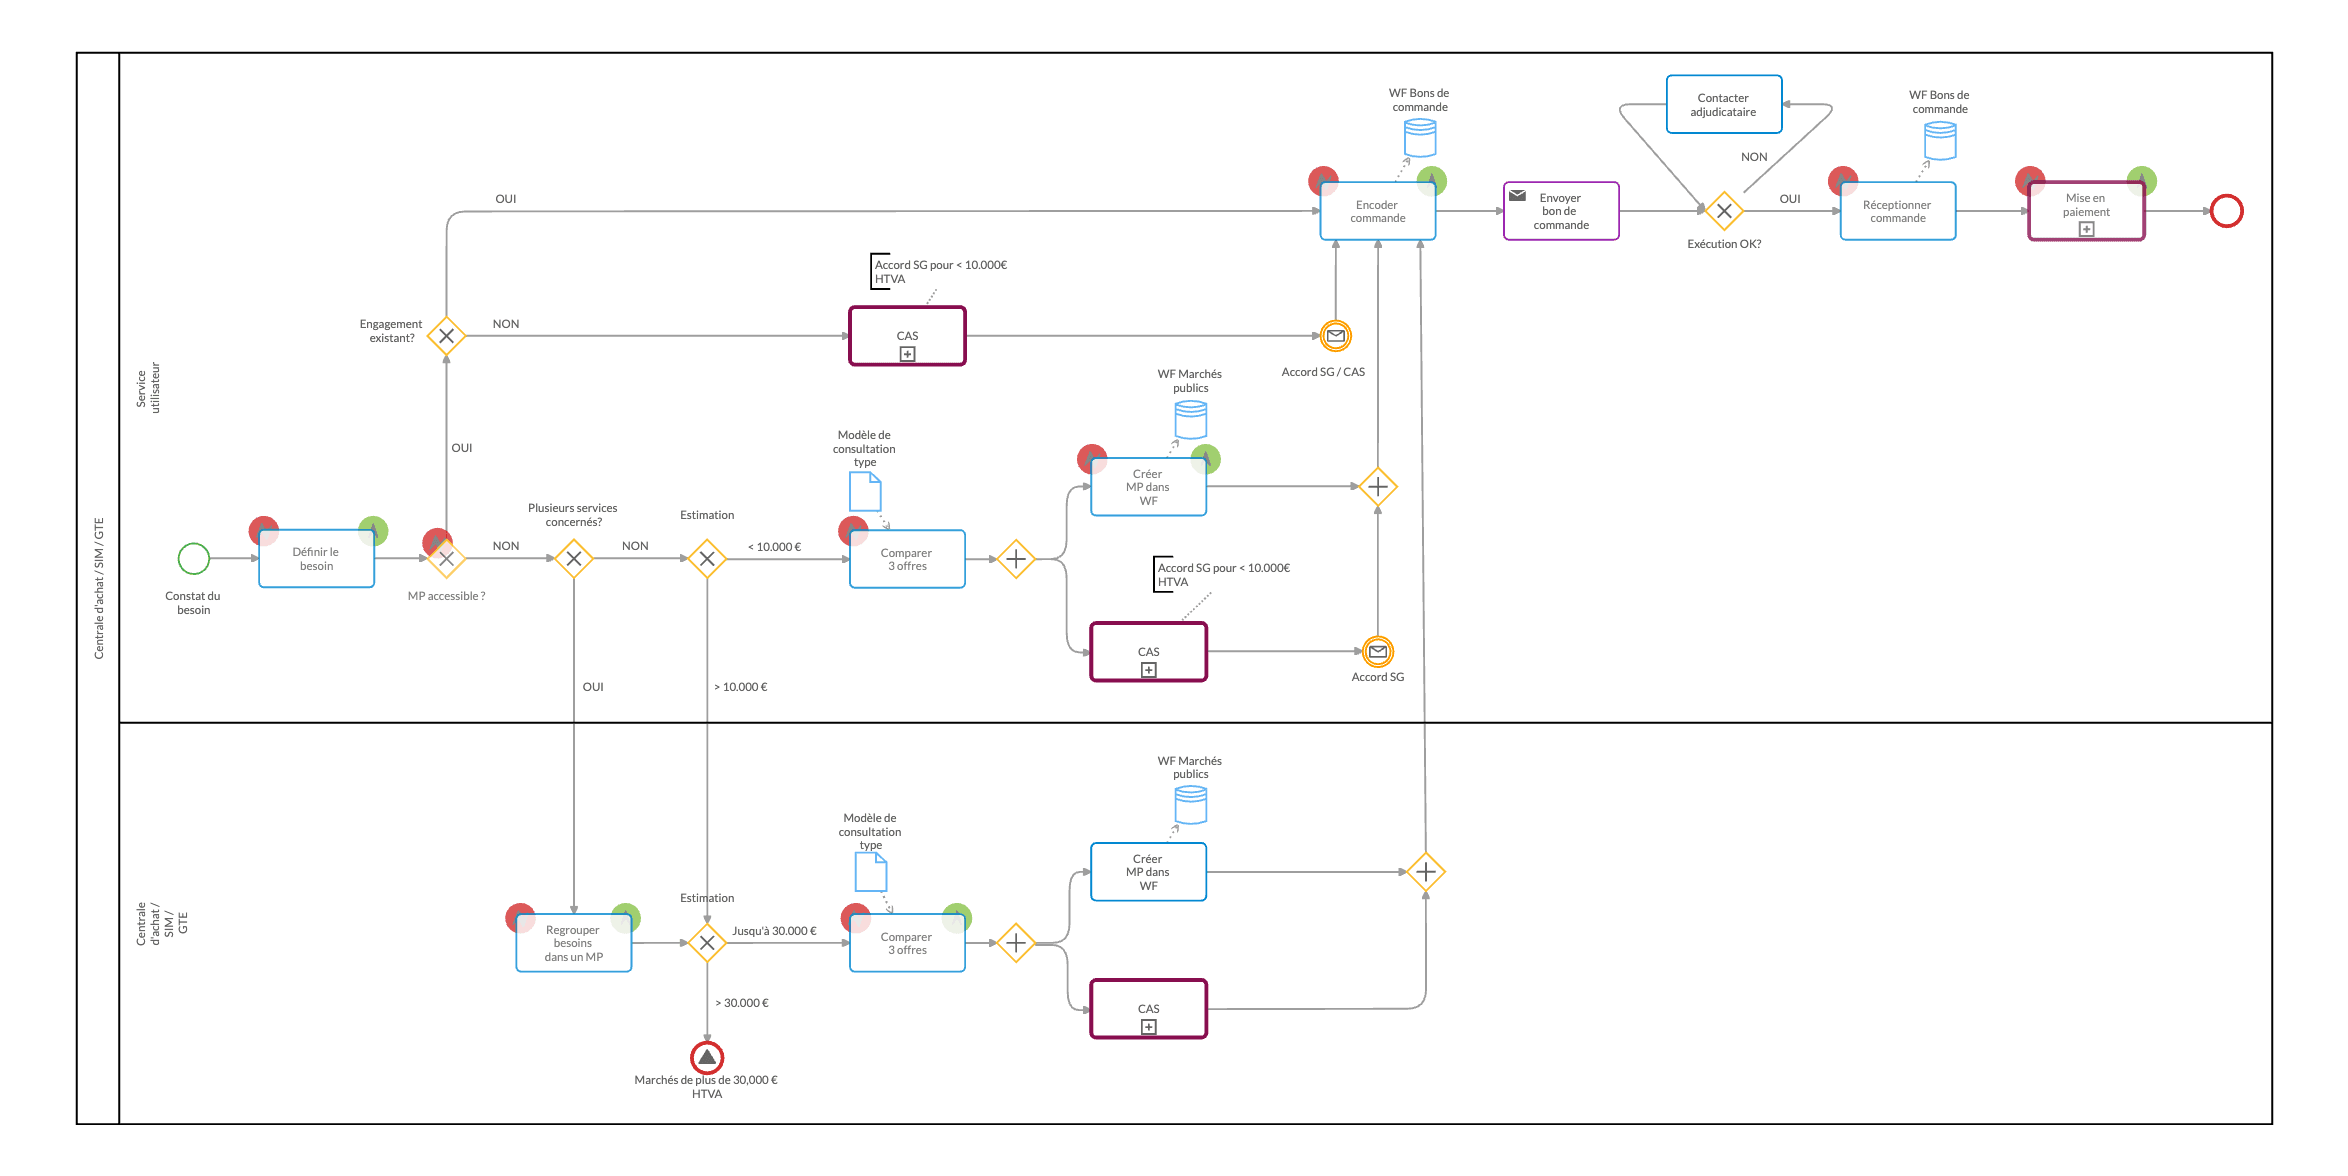 BPMN workflow of a low-value public contract